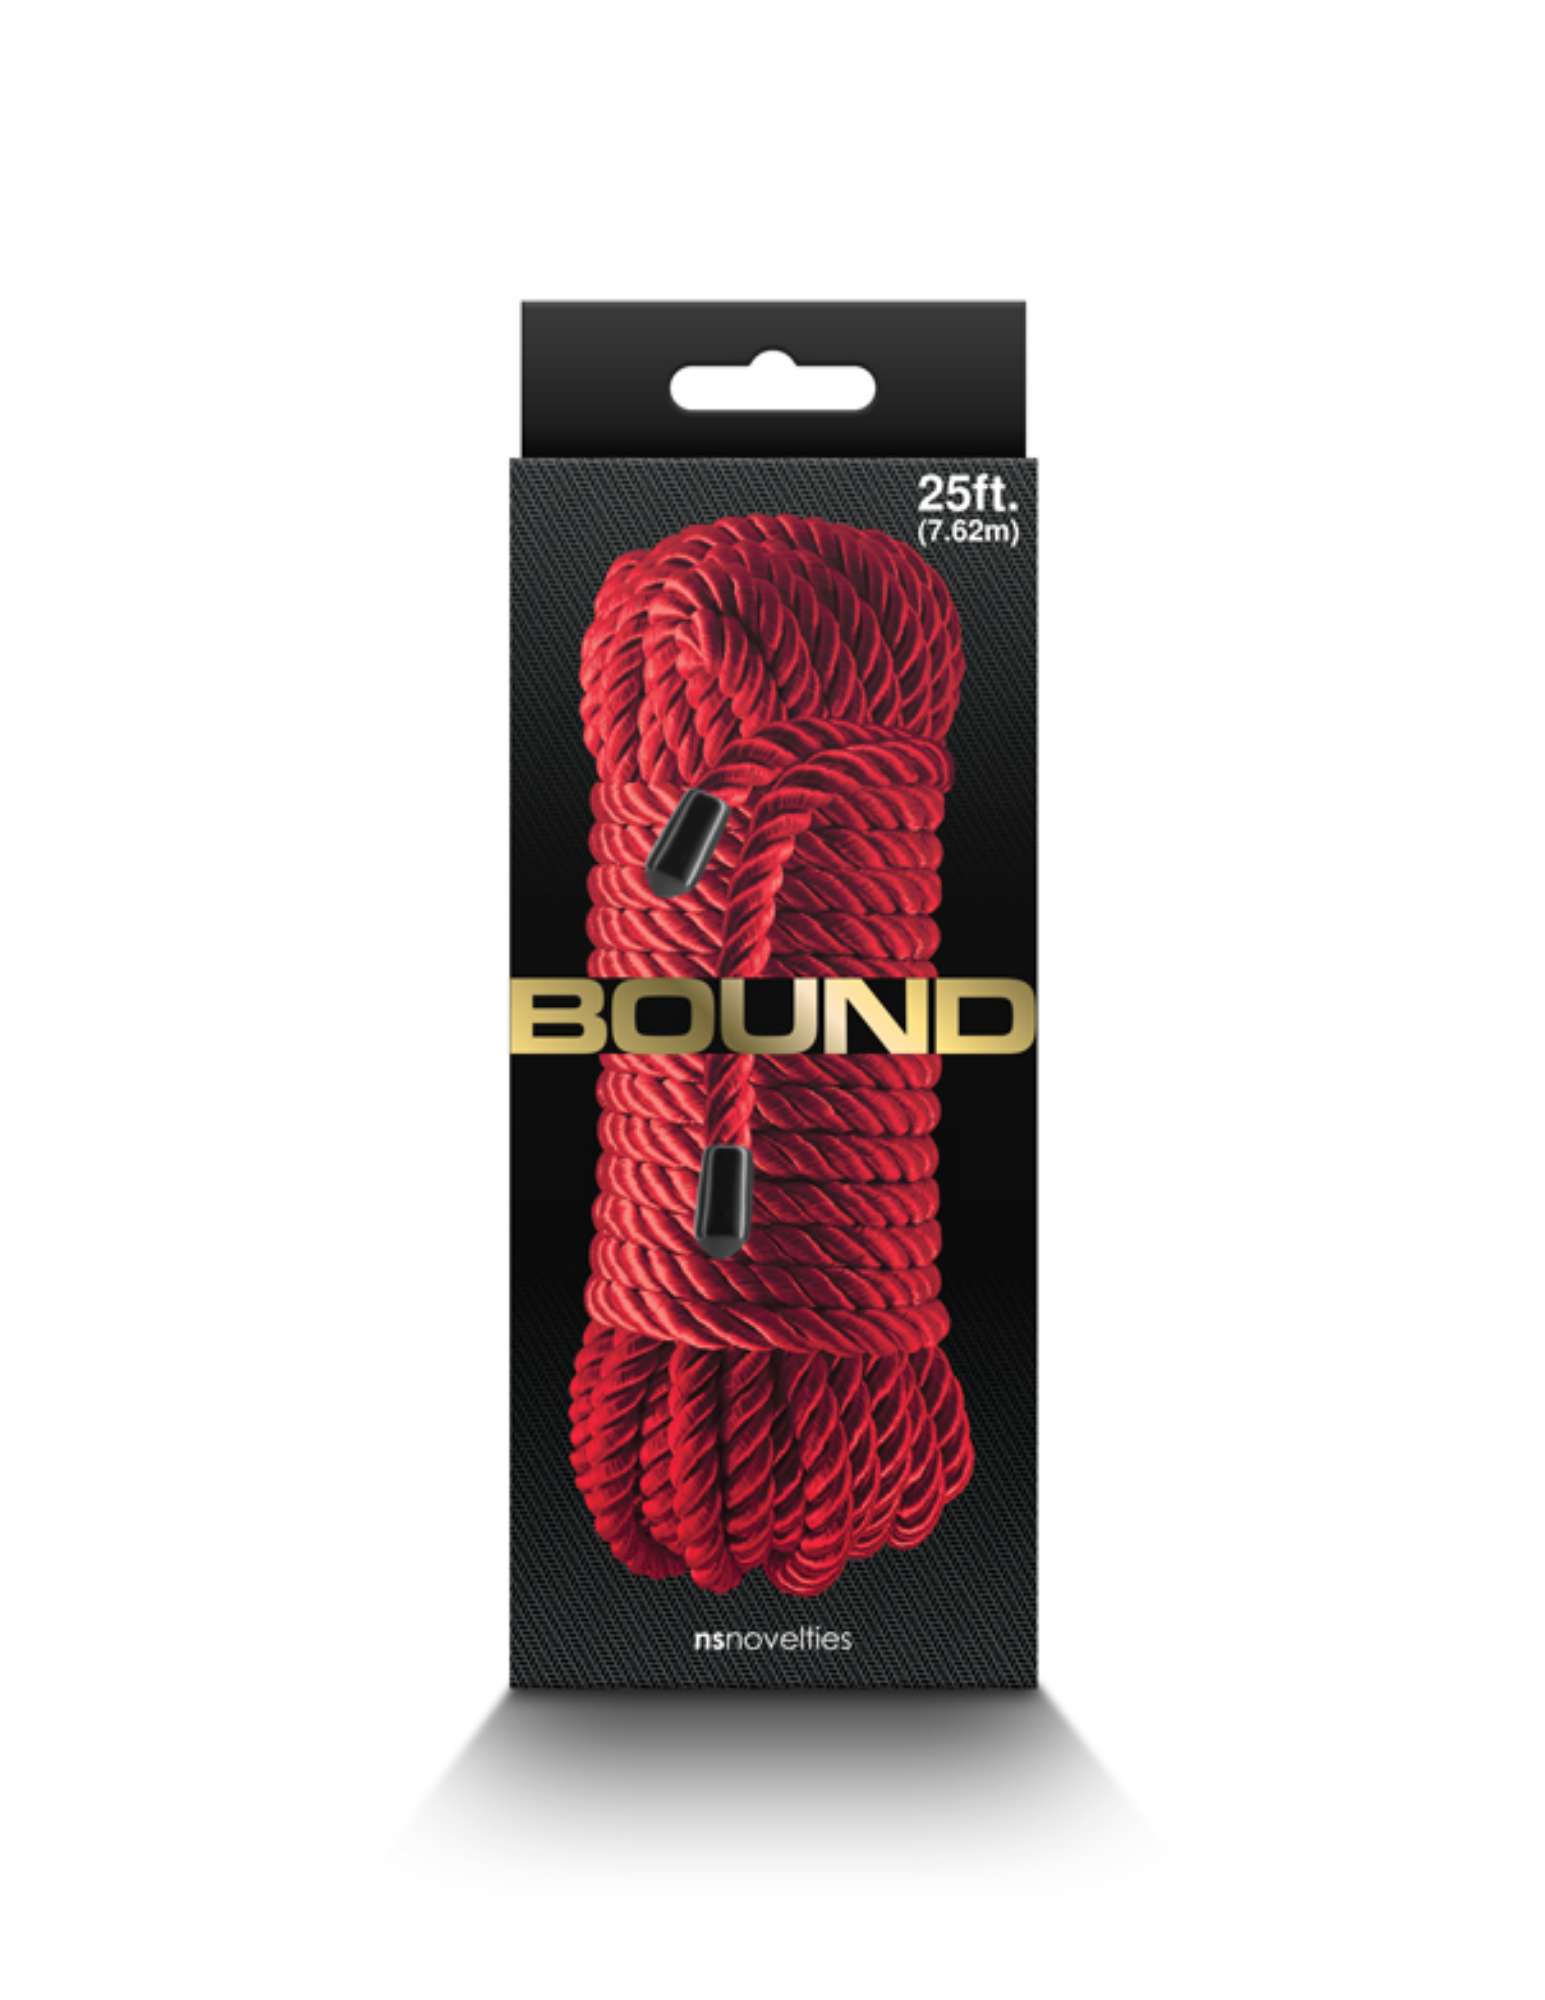 Photo of the box for the Bound Rope from NS Novelties (red).